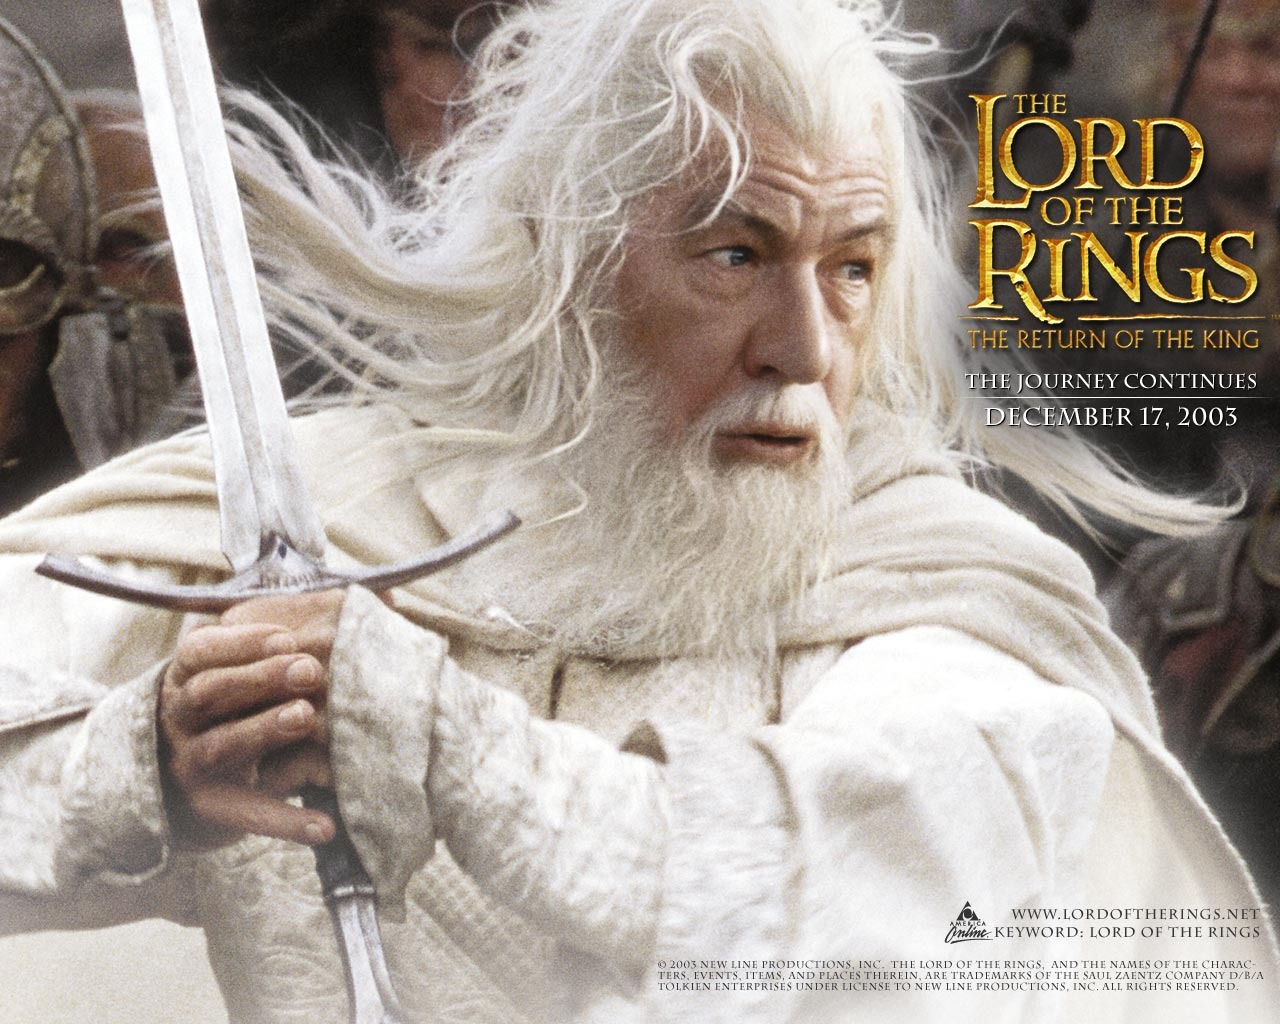 The Lord of the Rings wallpaper #16 - 1280x1024